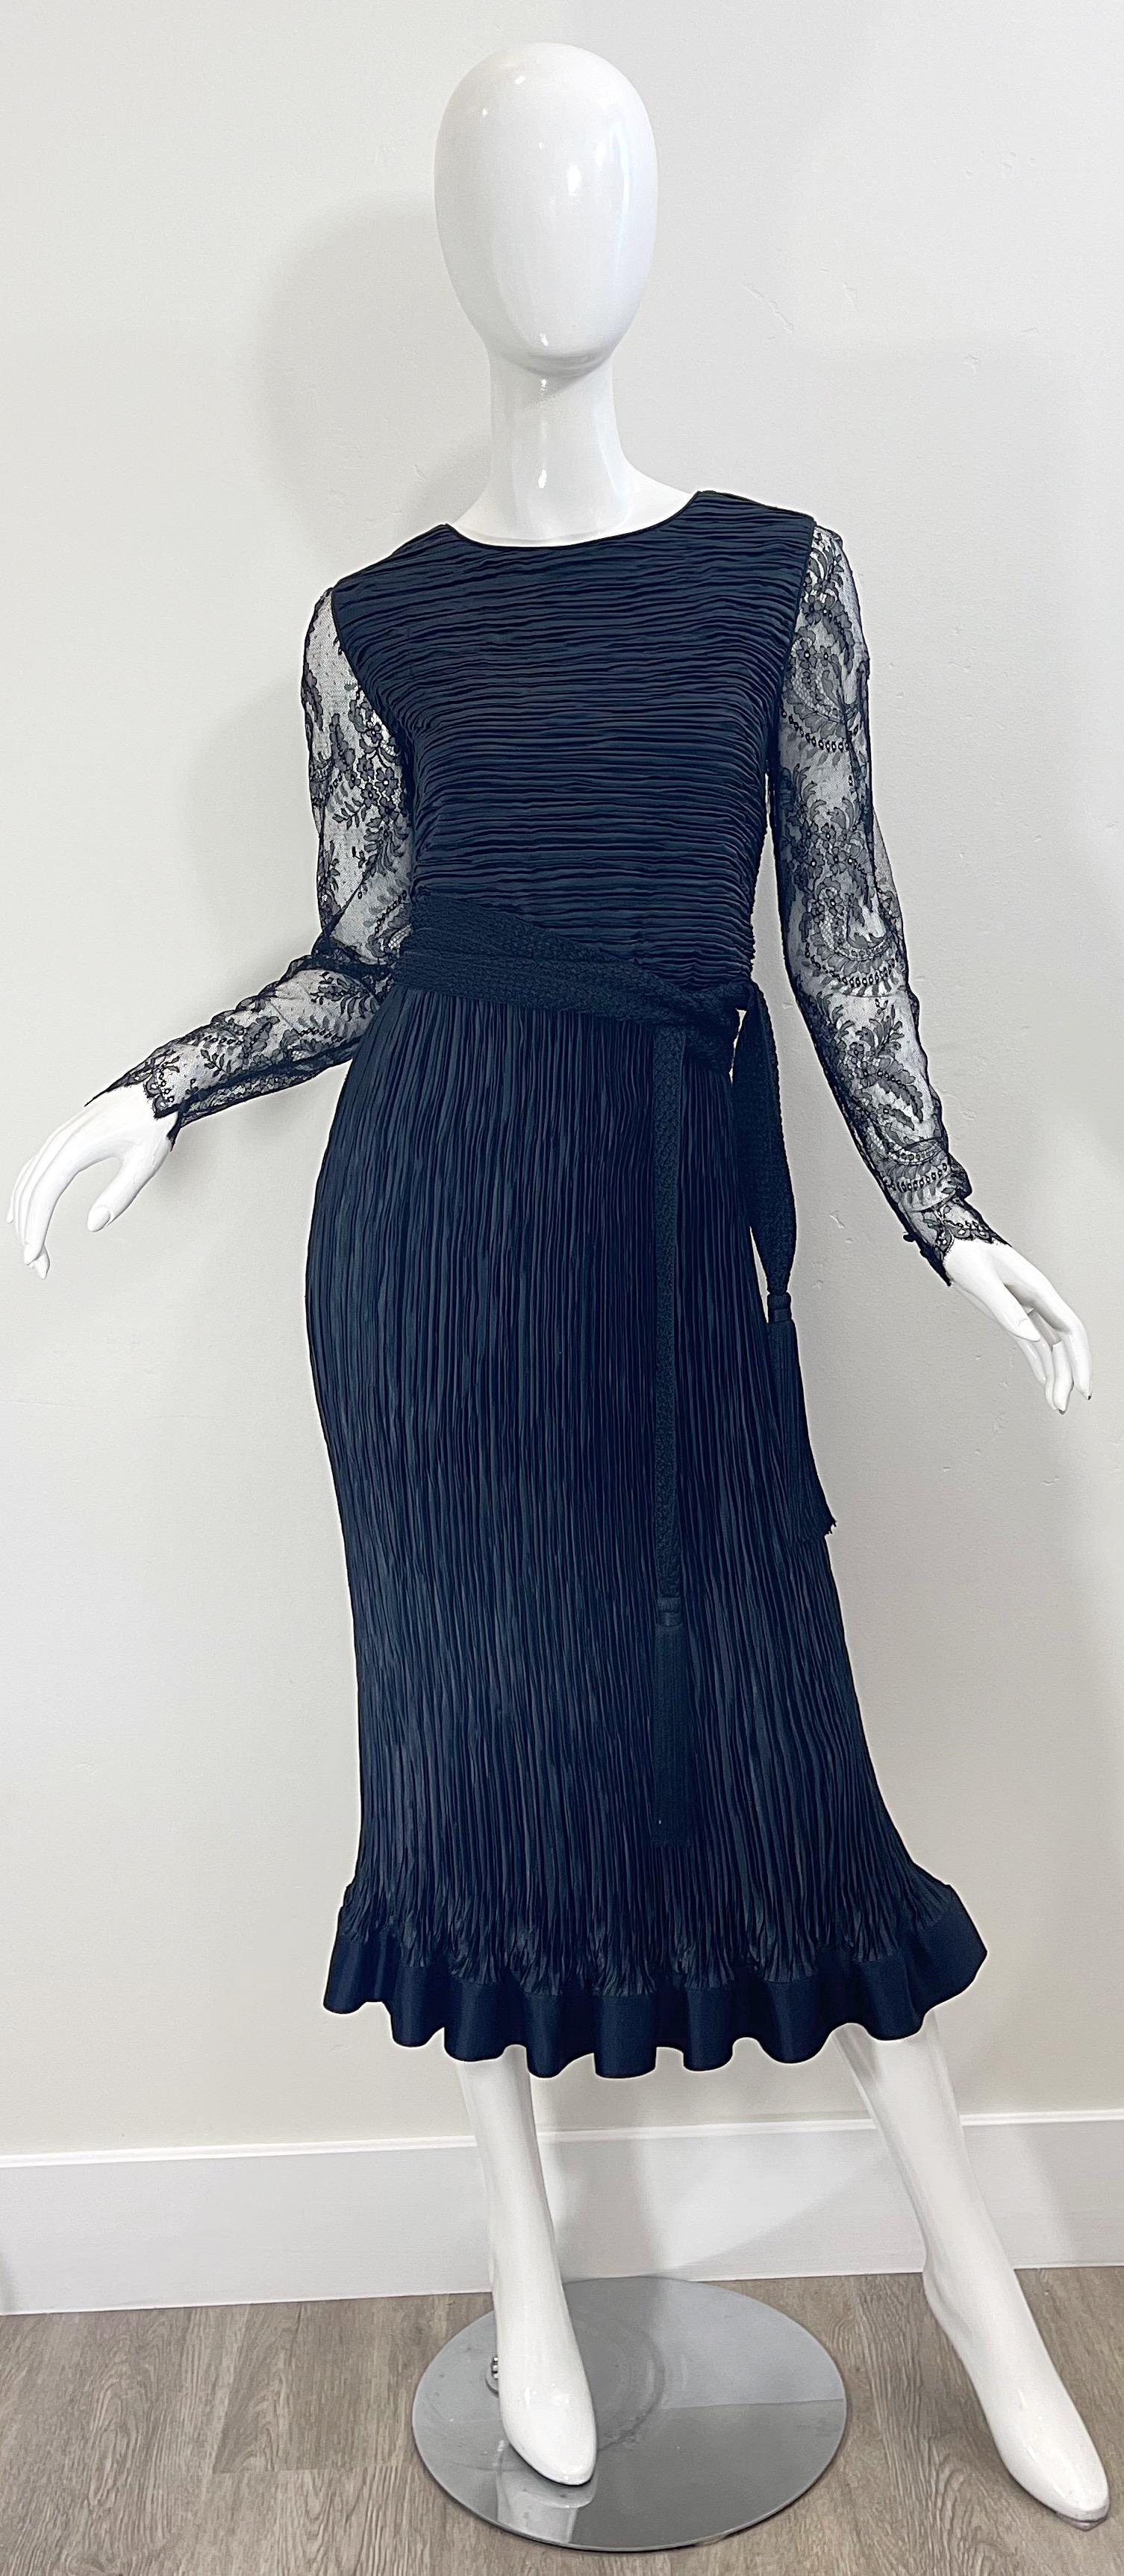 Beautiful 1990s OSCAR DE LA RENTA for Saks 5th Avenue black fortuny pleated chantilly French lace long sleeve dress ! Features a flattering pleated body with sheer lace sleeves, which have buttons at each cuff. Matching tassel belt has fringe at